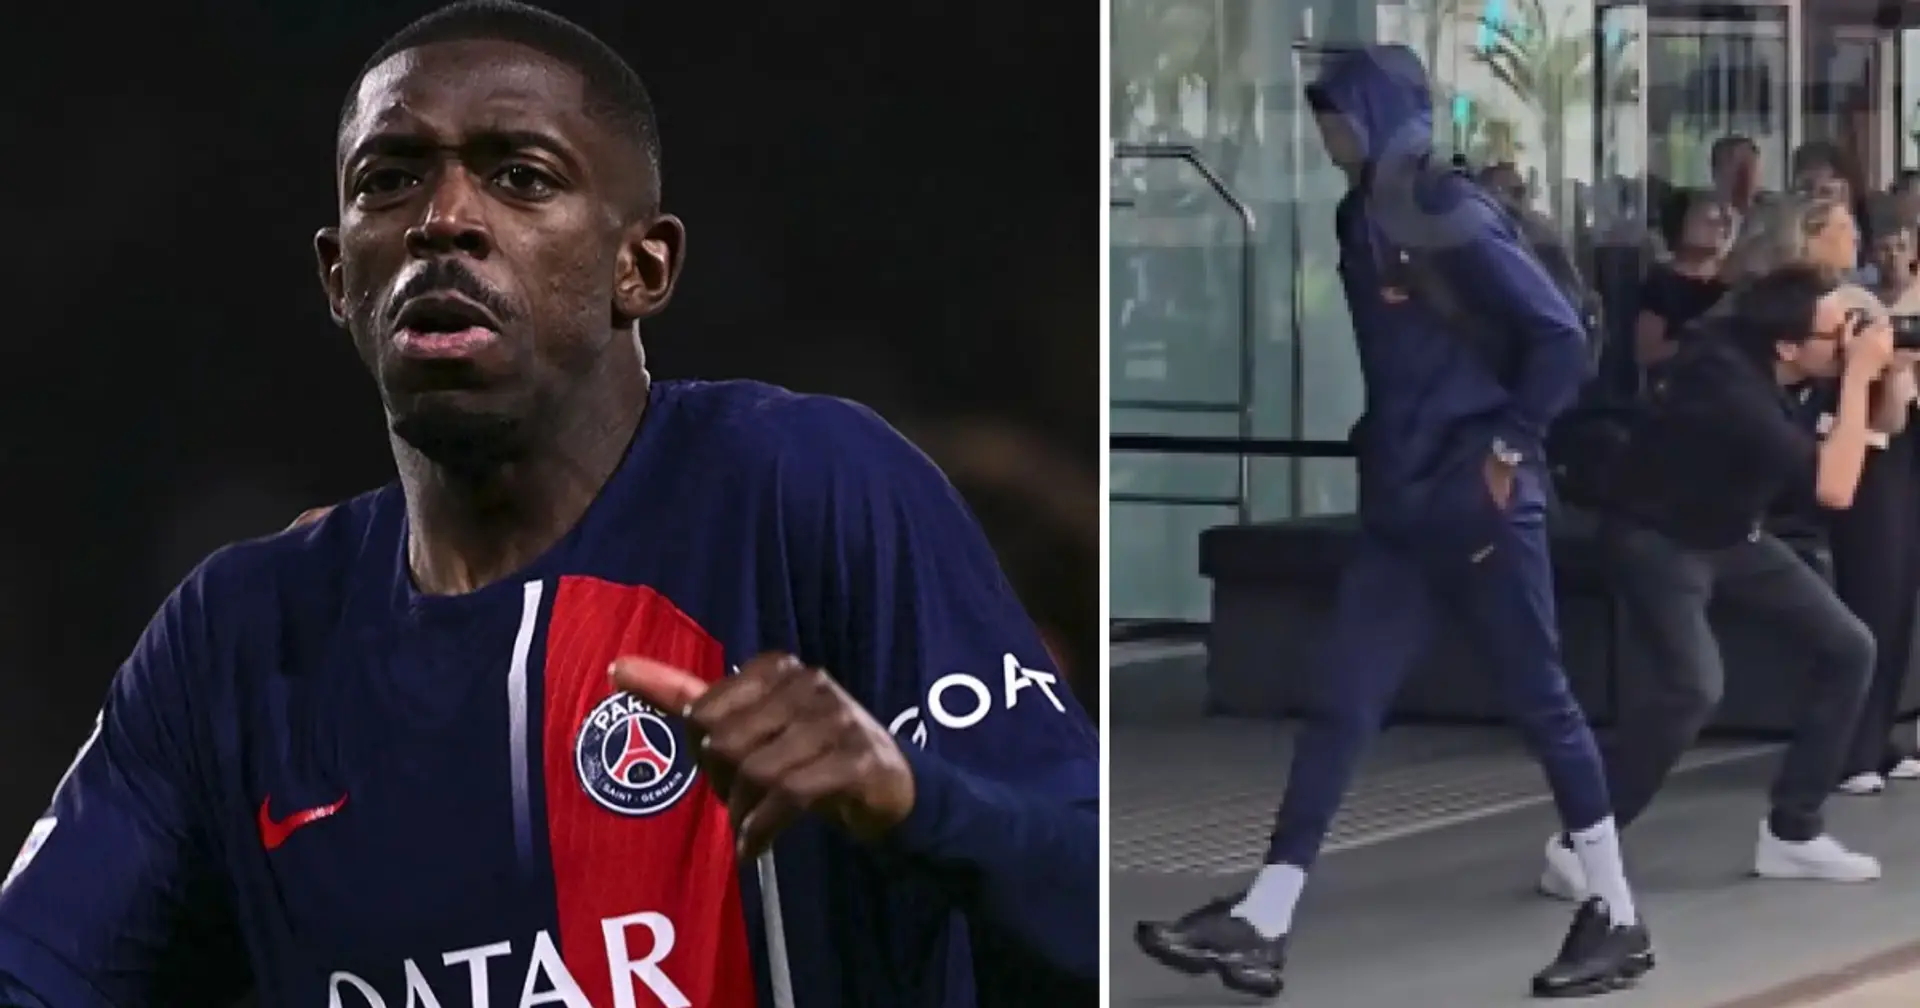 Spotted: Dembele receives insult from fans upon landing in Barcelona with PSG